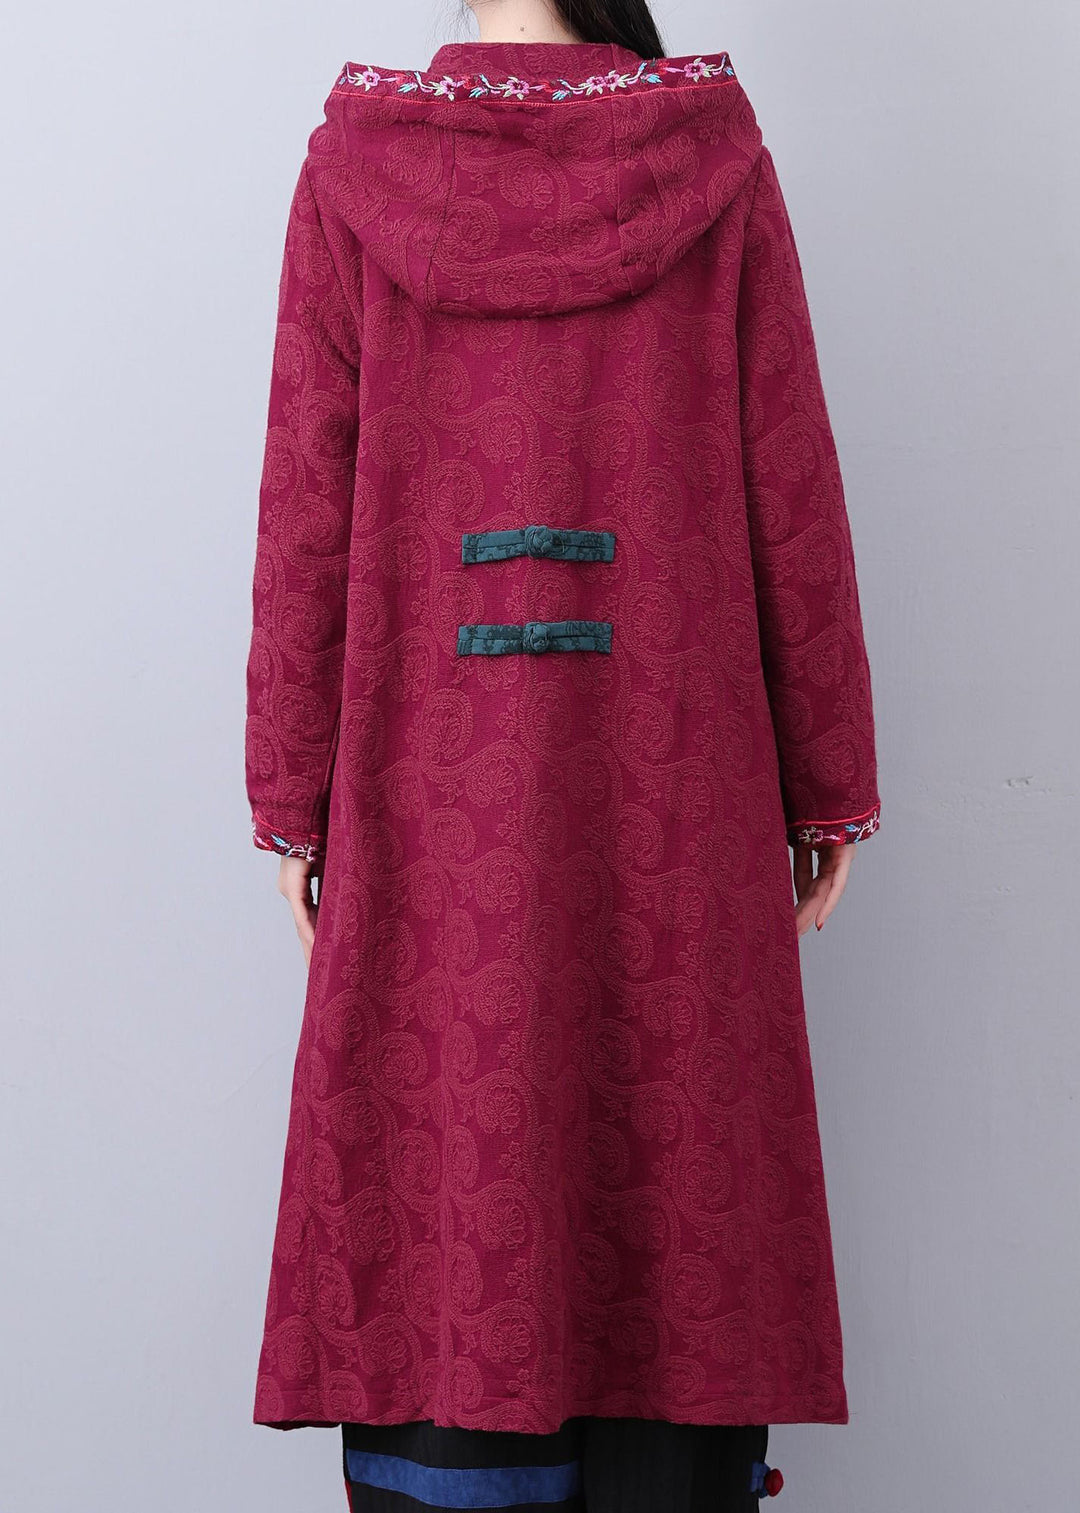 Art Brick Red Hooded Embroidered Jacquard Long Coat Fall